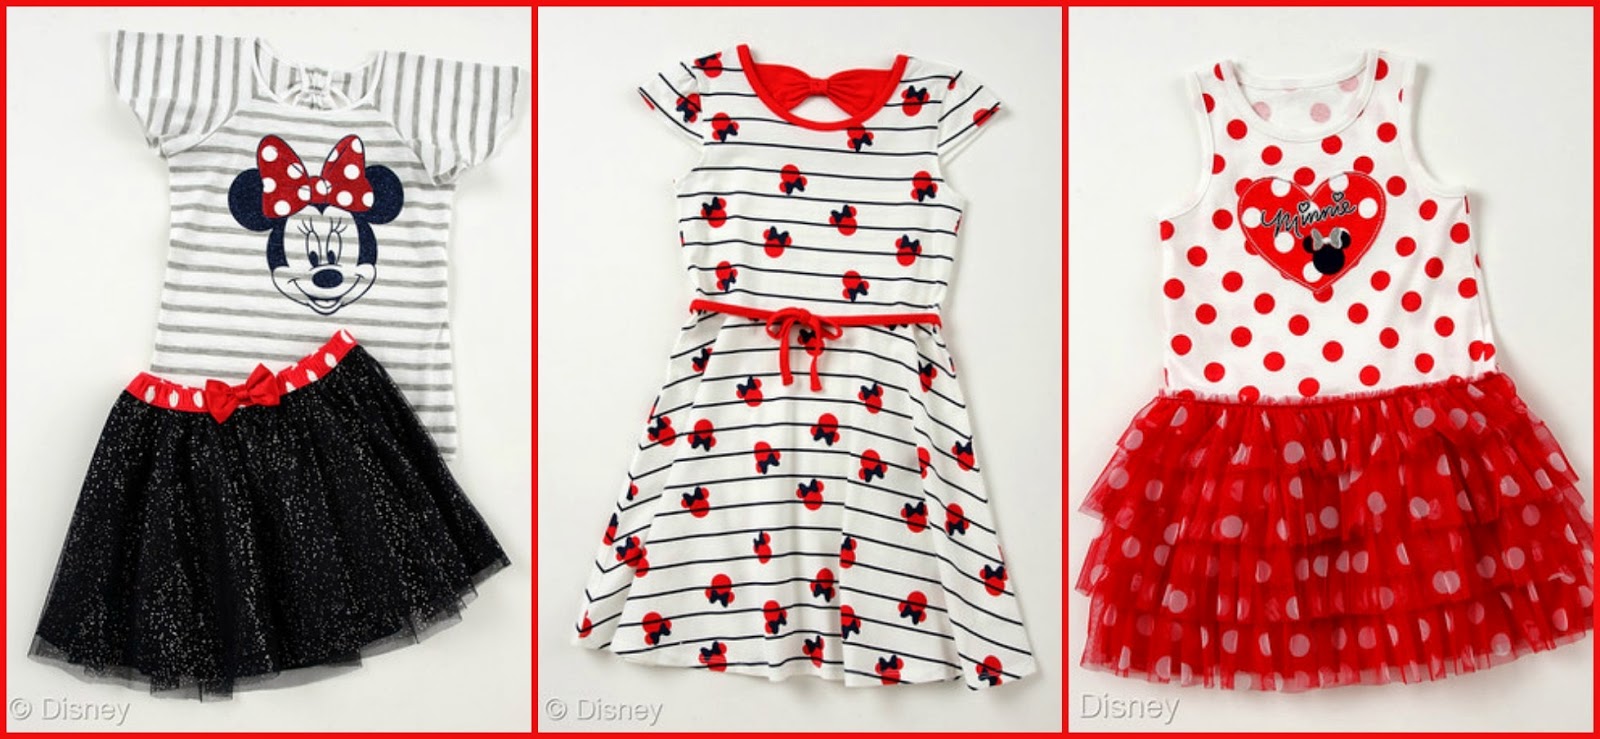 Minnie Mouse clothing